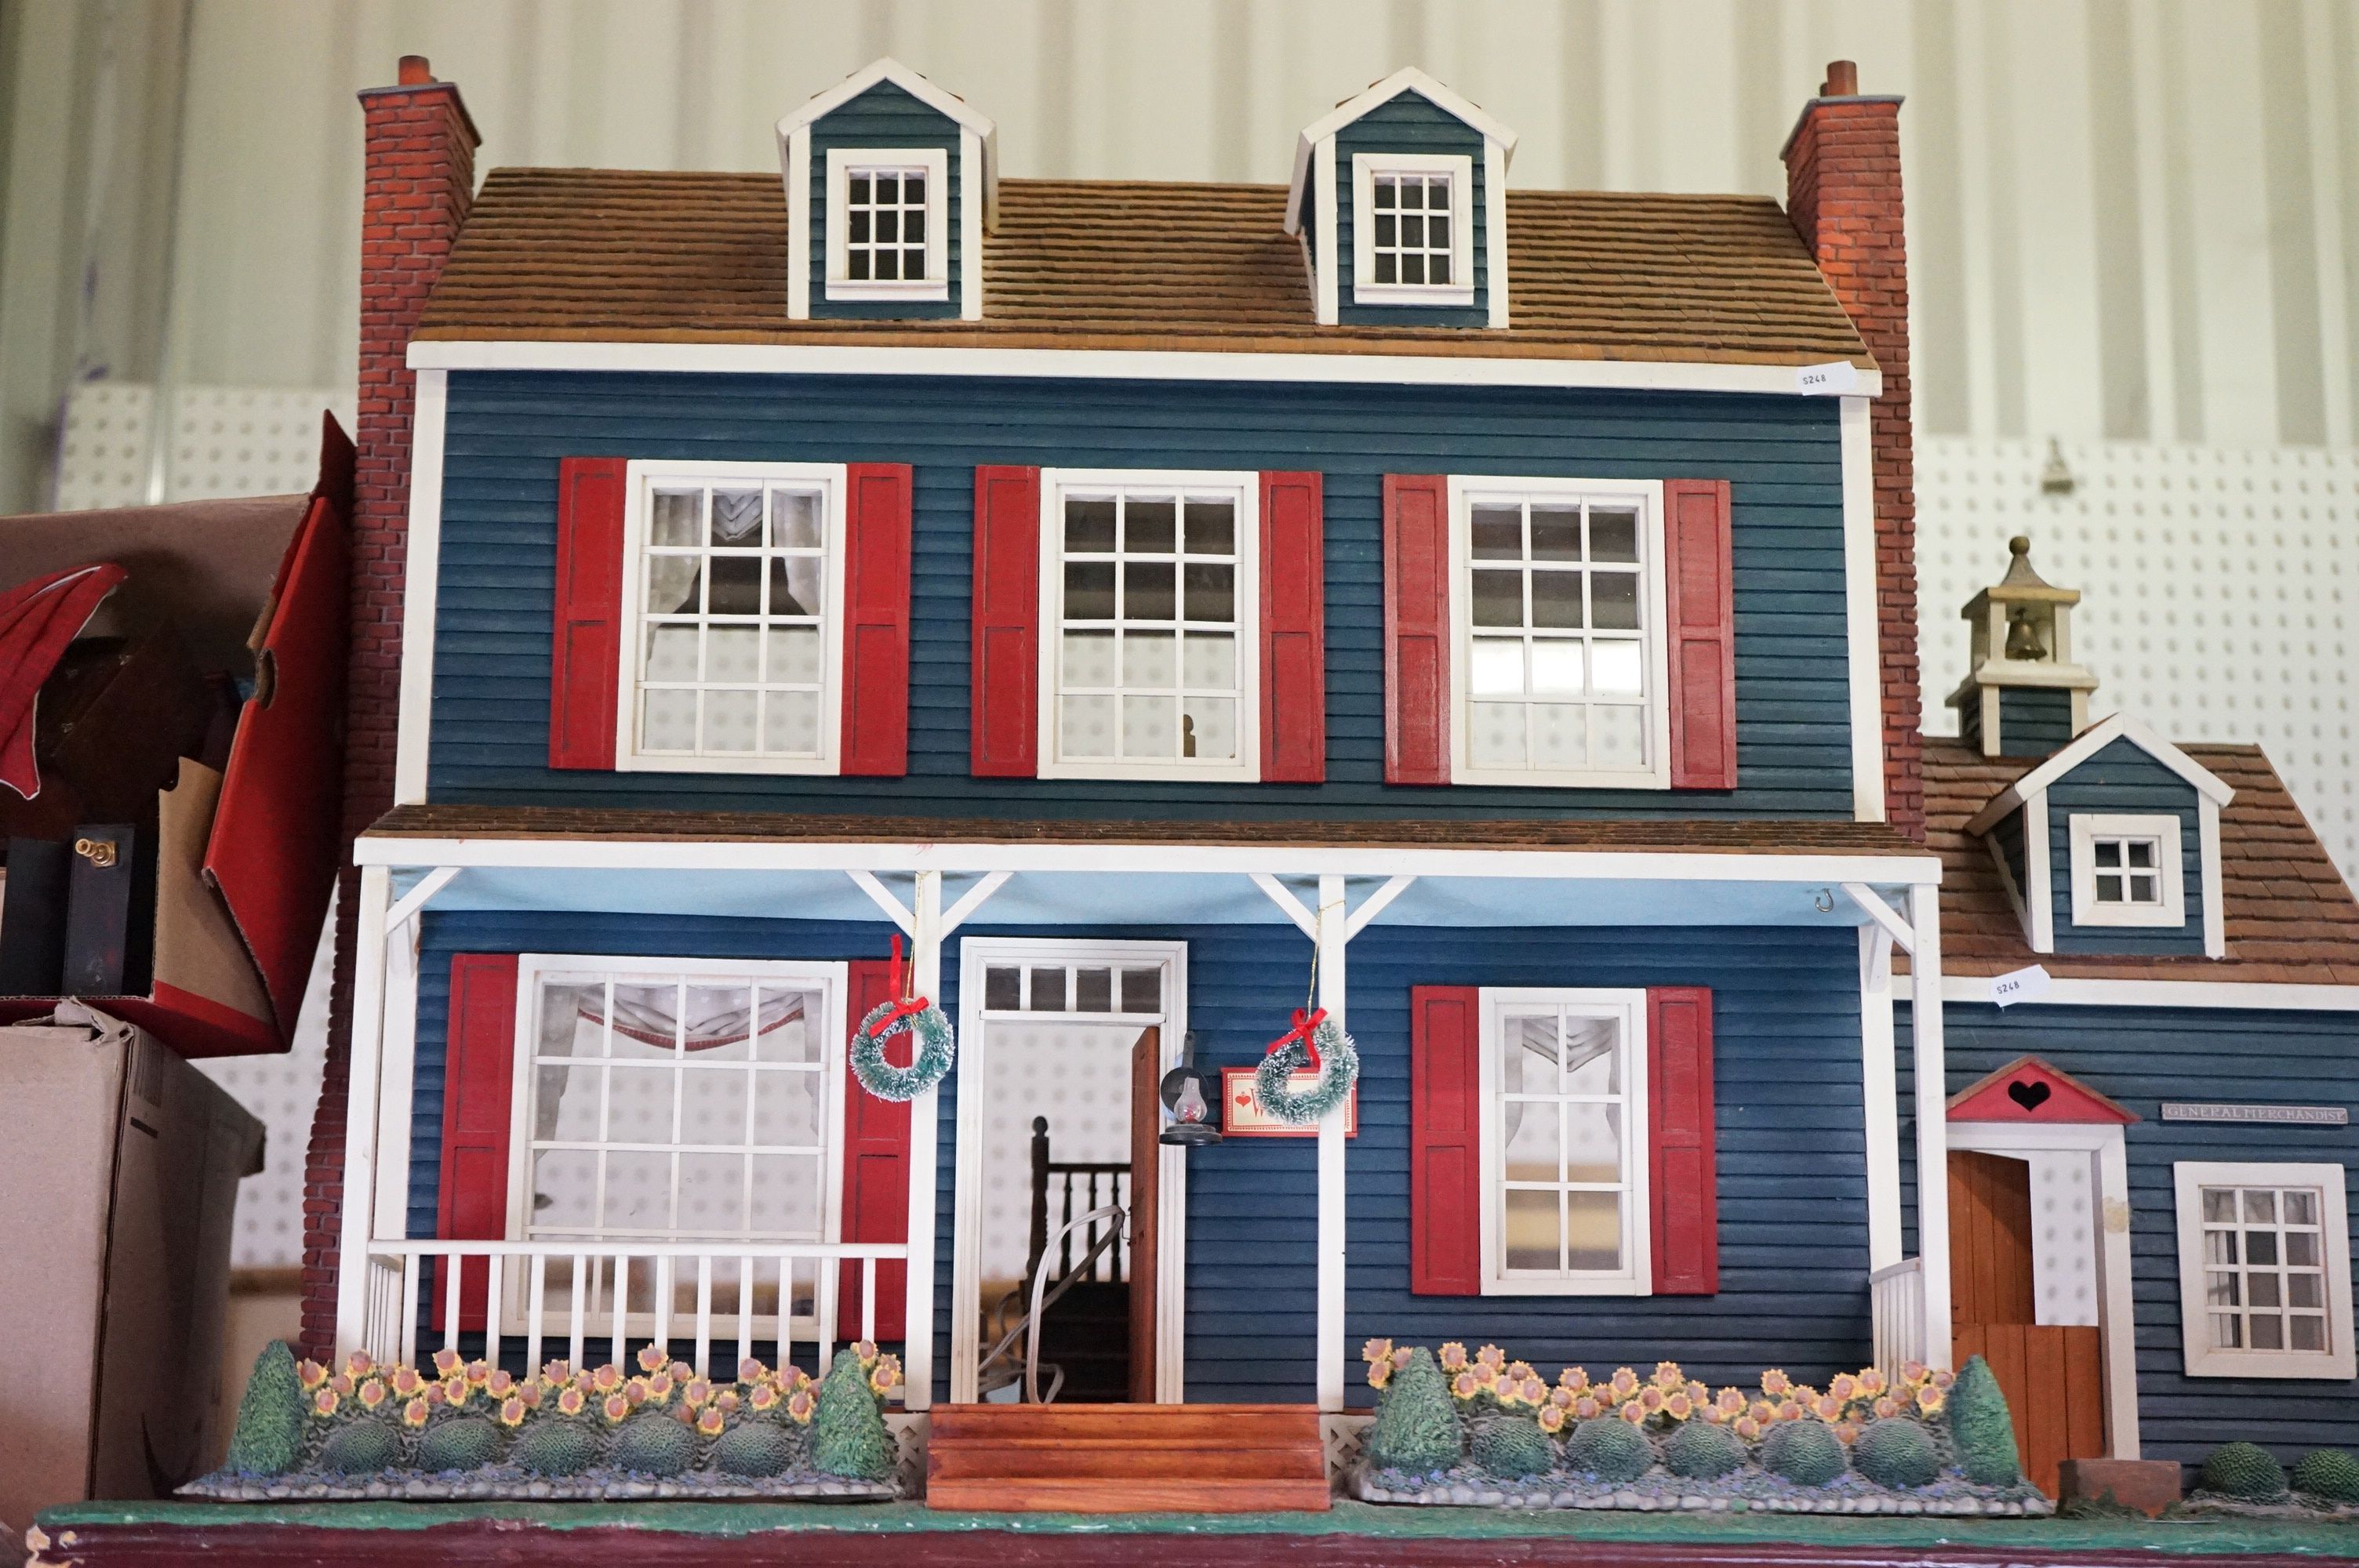 Franklin Mint ' Heartland Hollow ' large painted wooden dolls house & hardware store with garden - Image 5 of 26